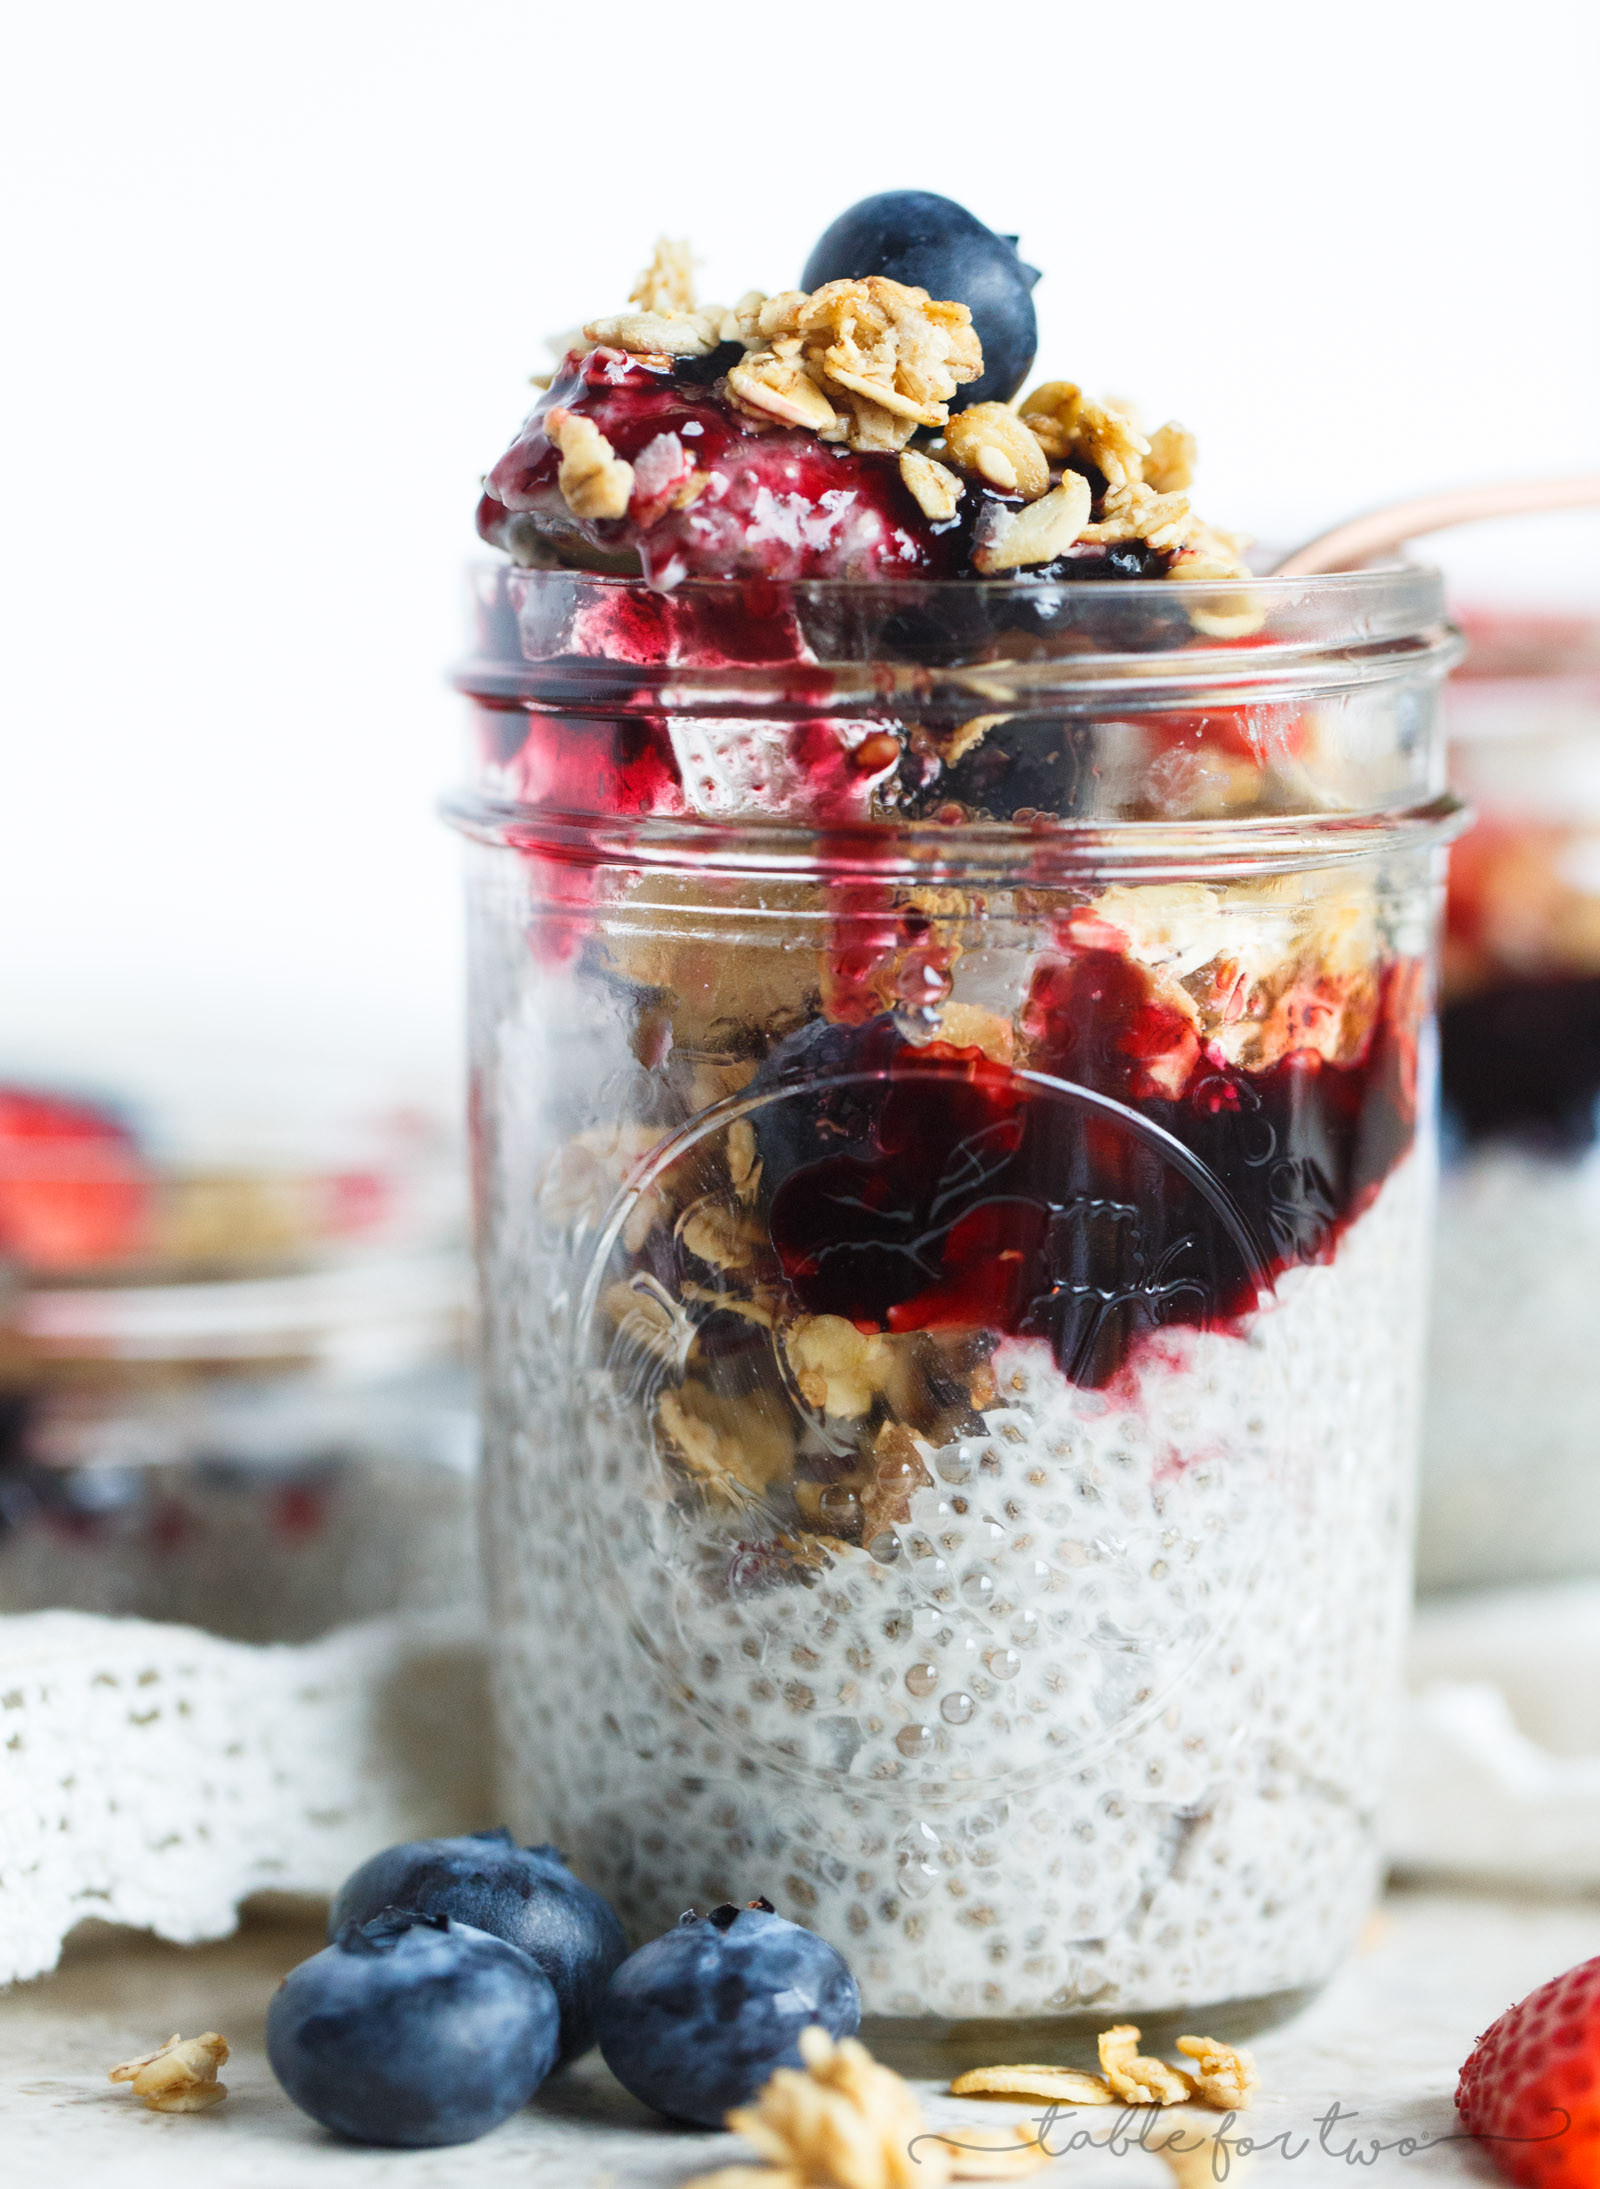 Chia Seed Breakfast Recipes
 Coconut Chia Seed Pudding with Berries and Granola Table